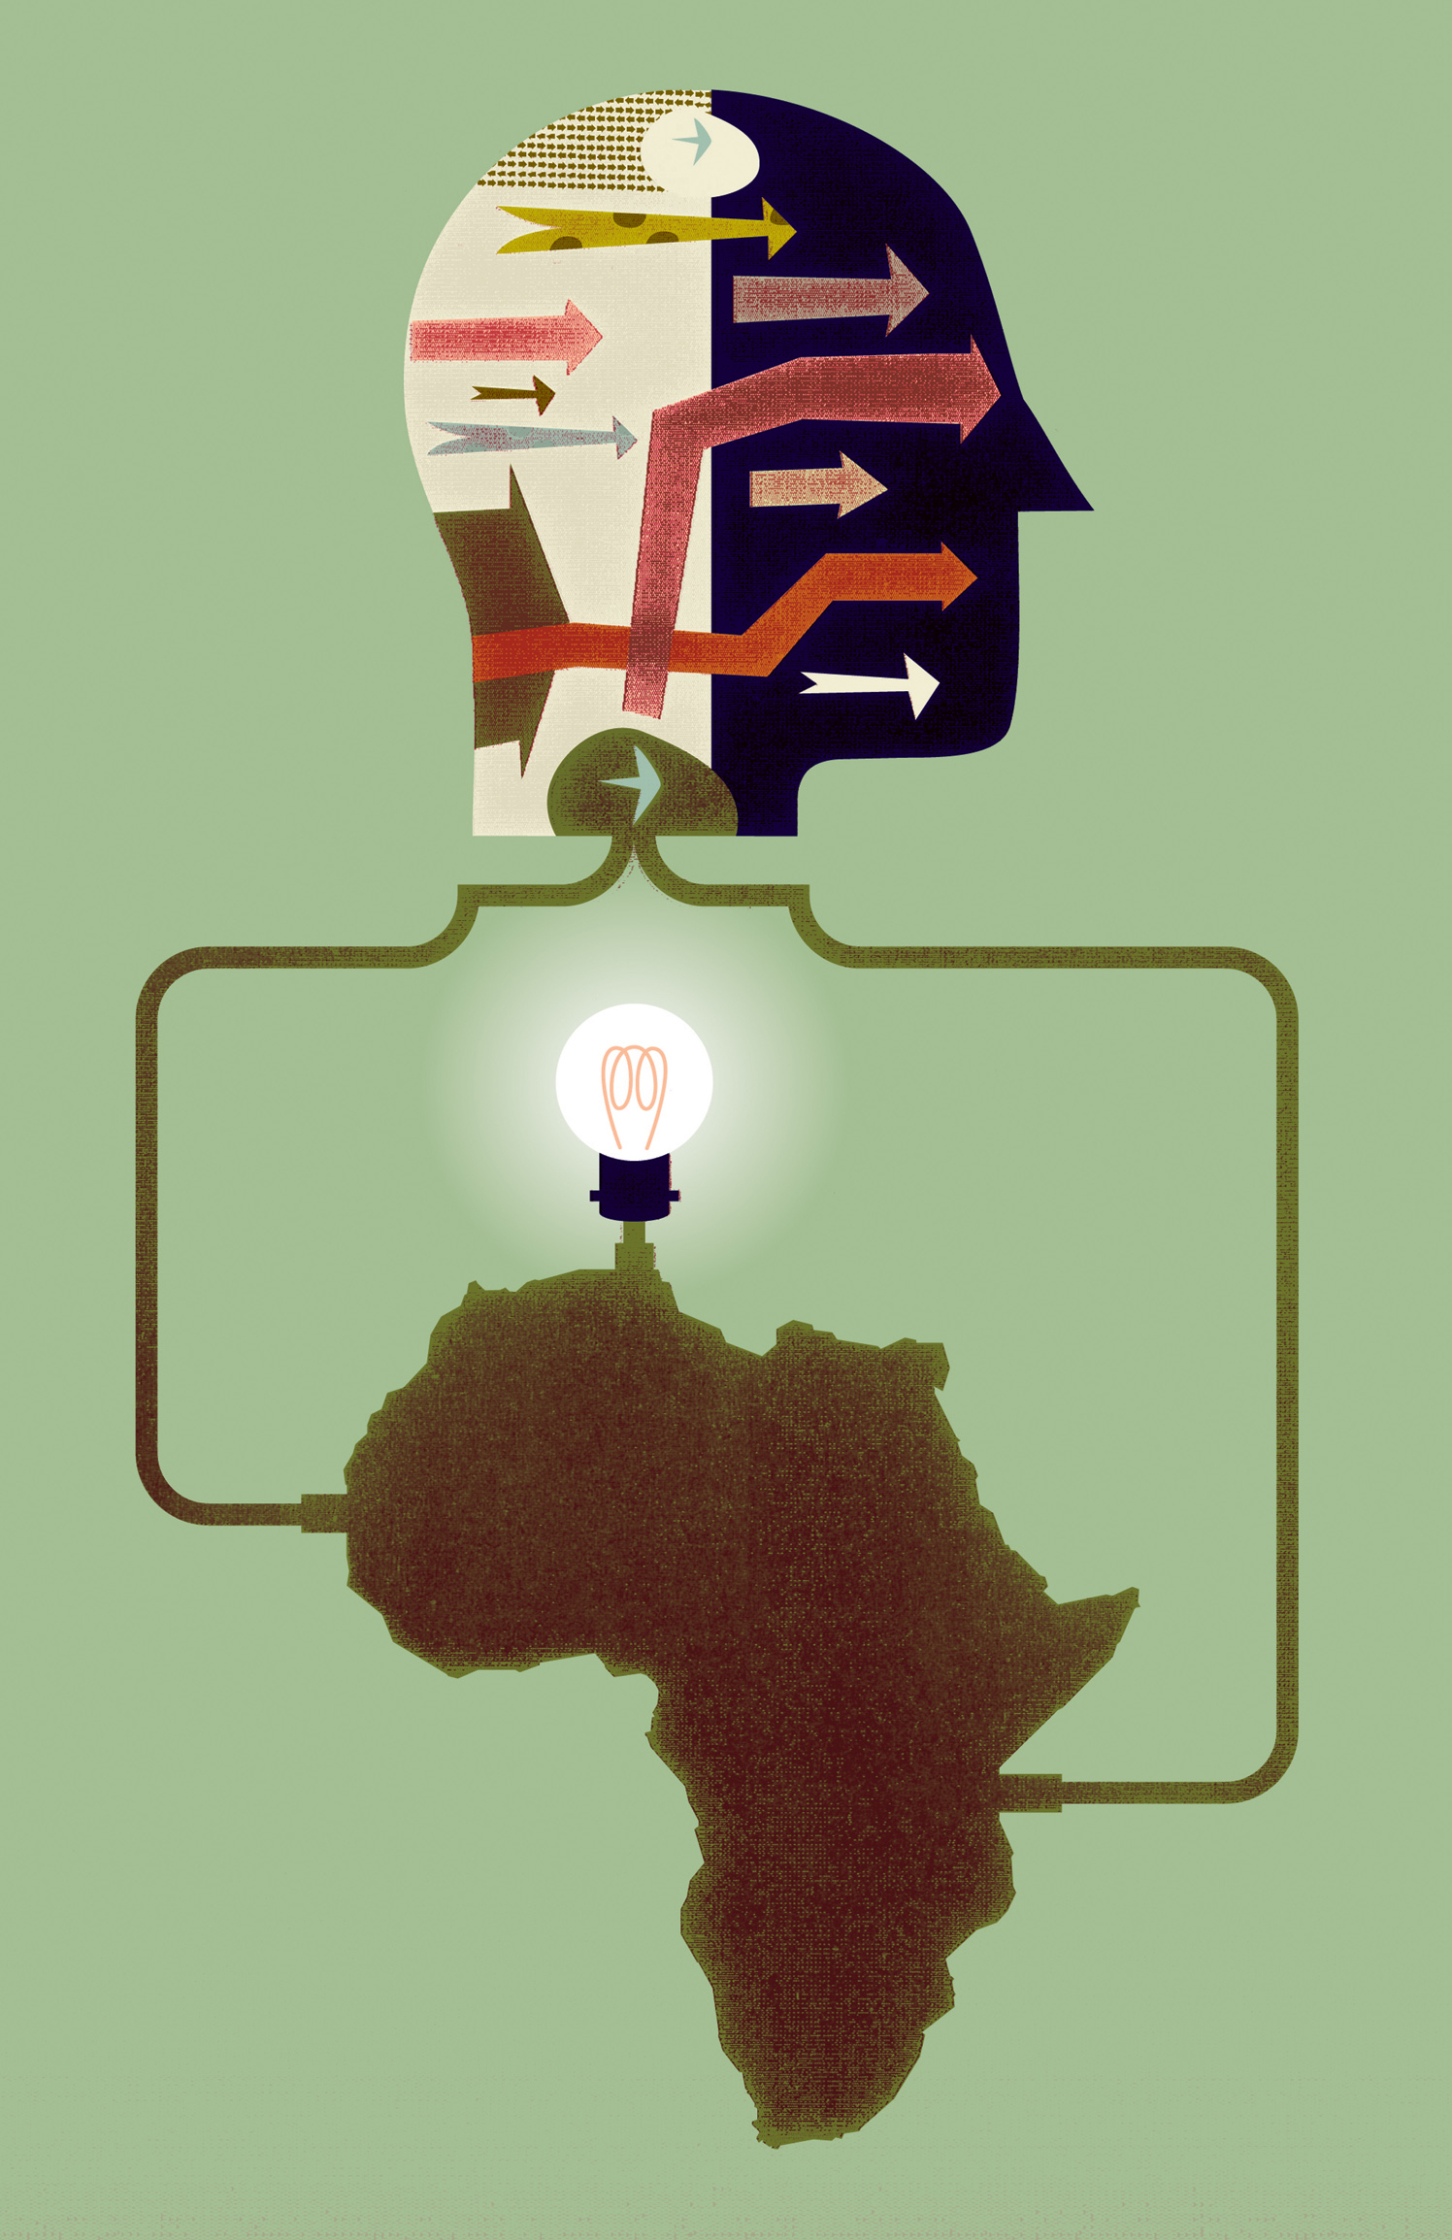 The Future for Africa